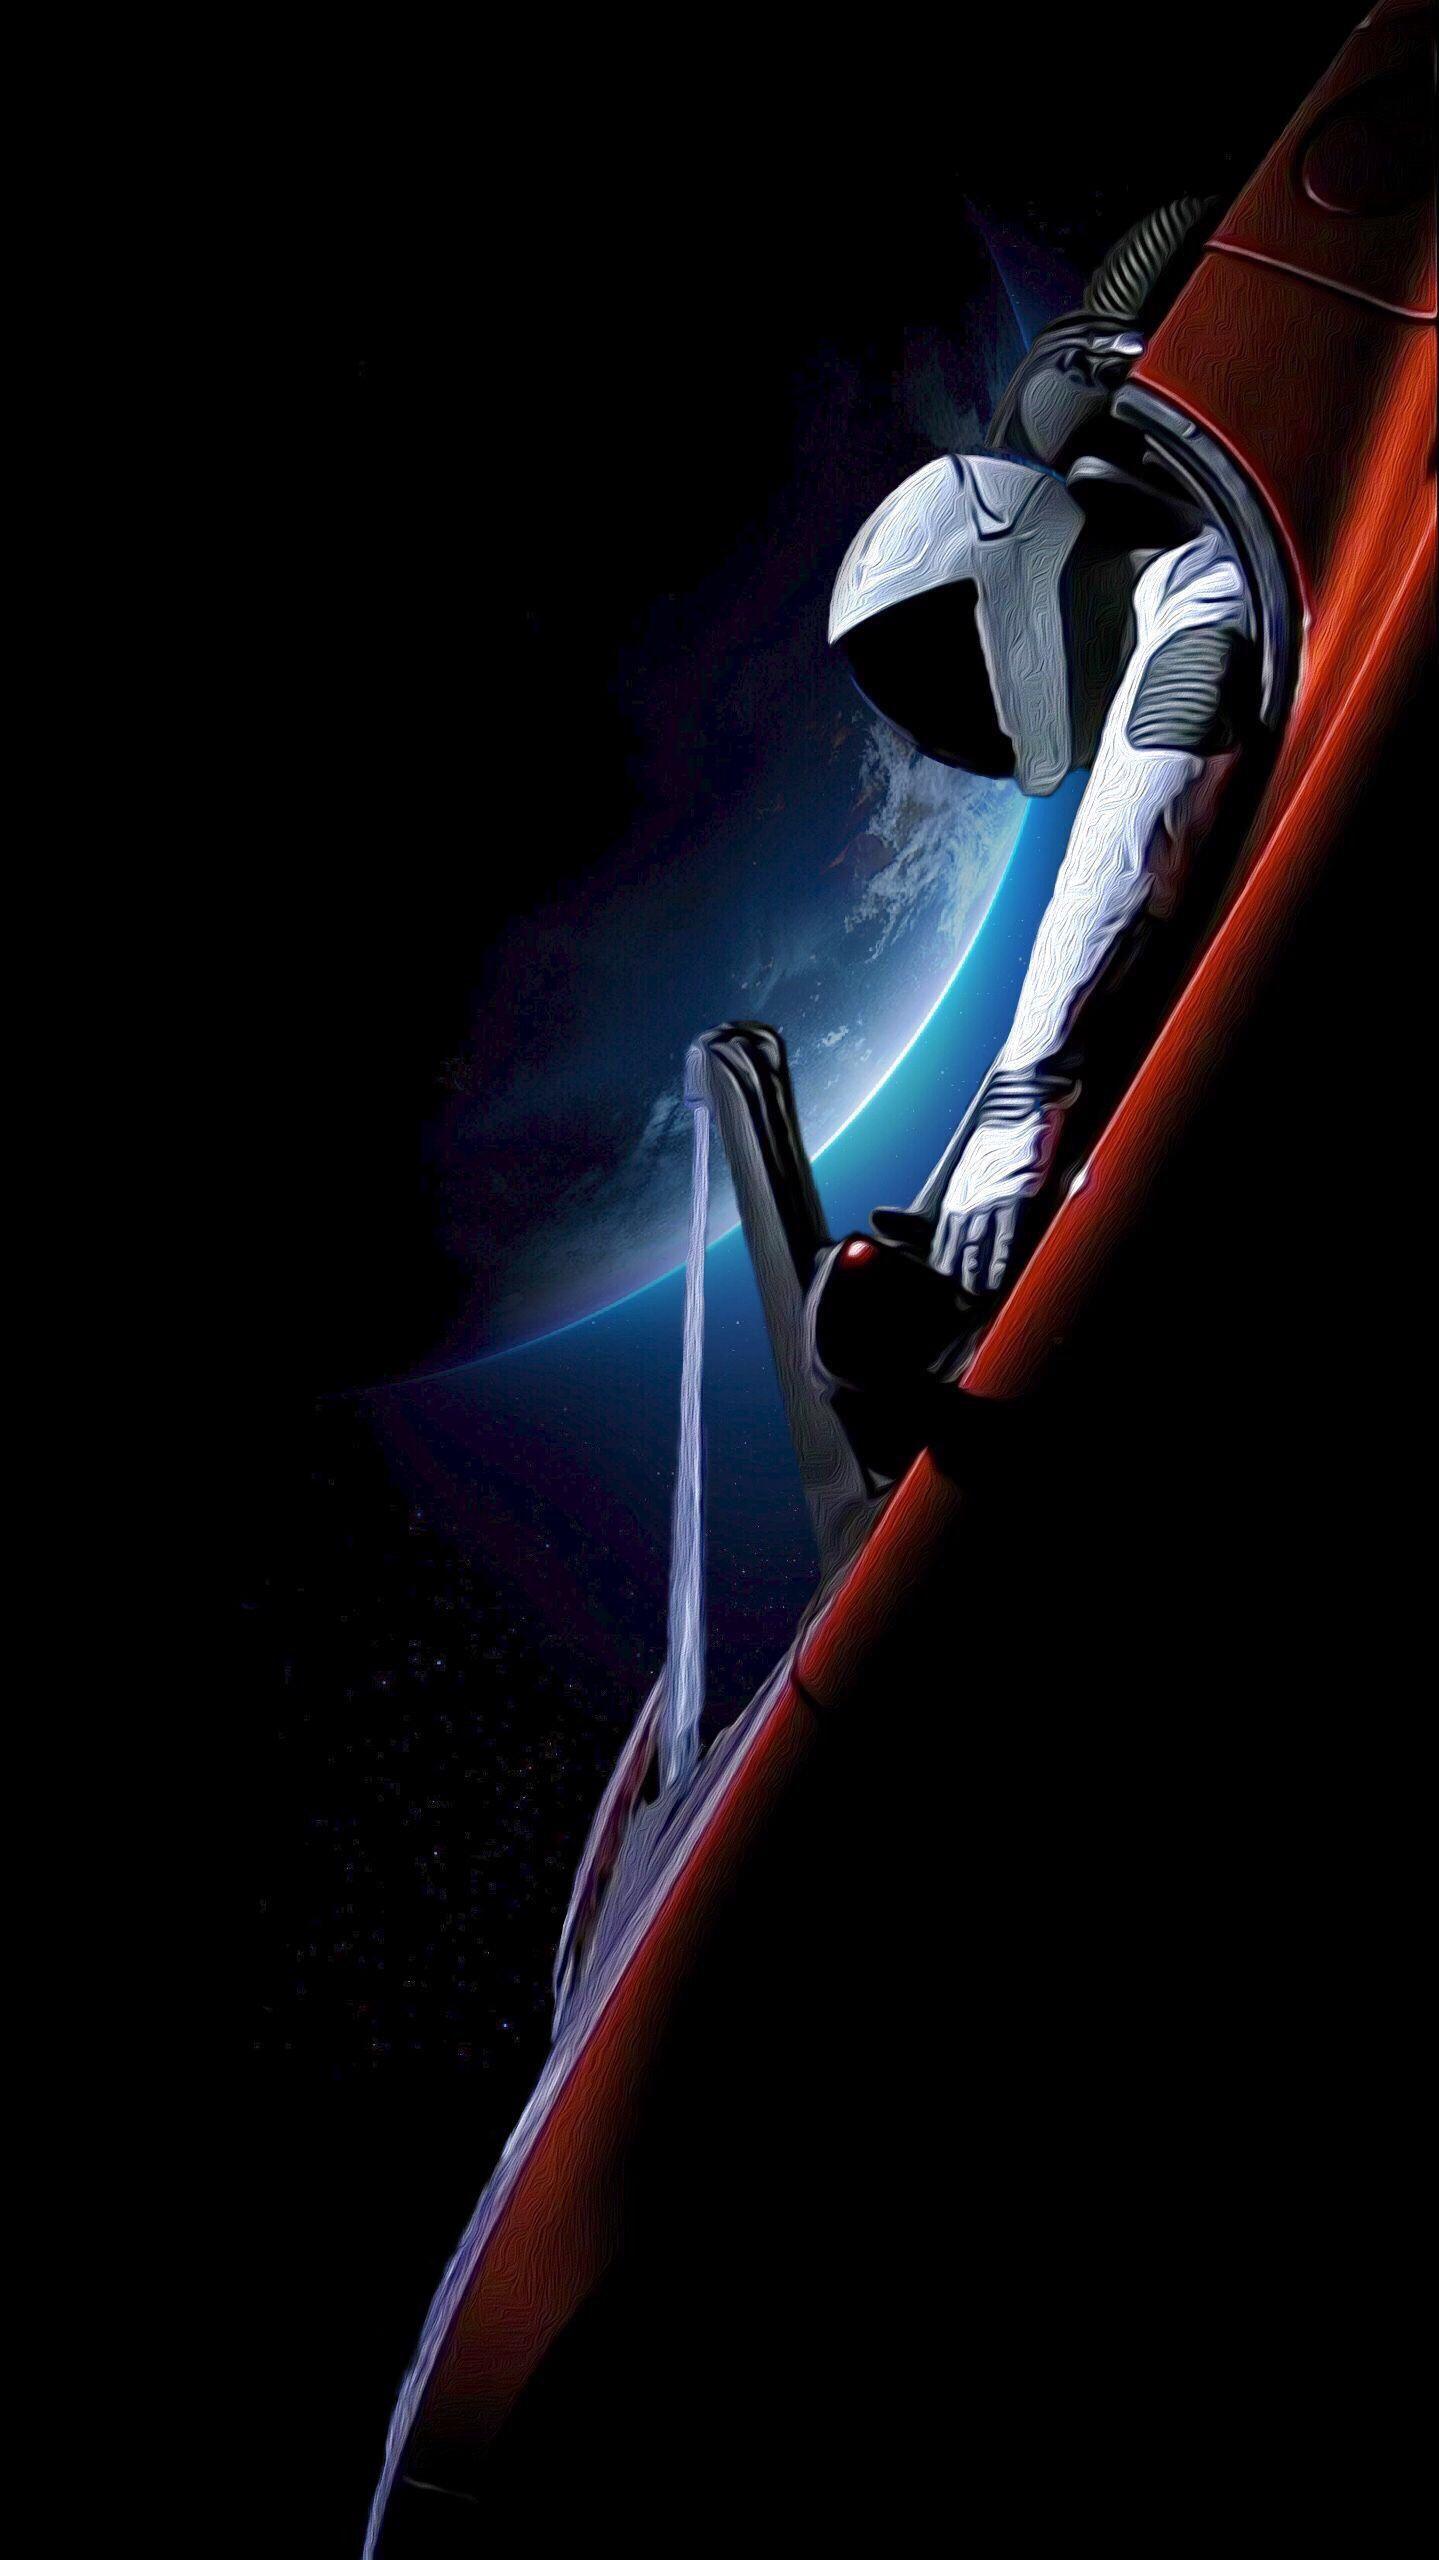 The SpaceX Starman wallpaper I posted a couple days ago did well